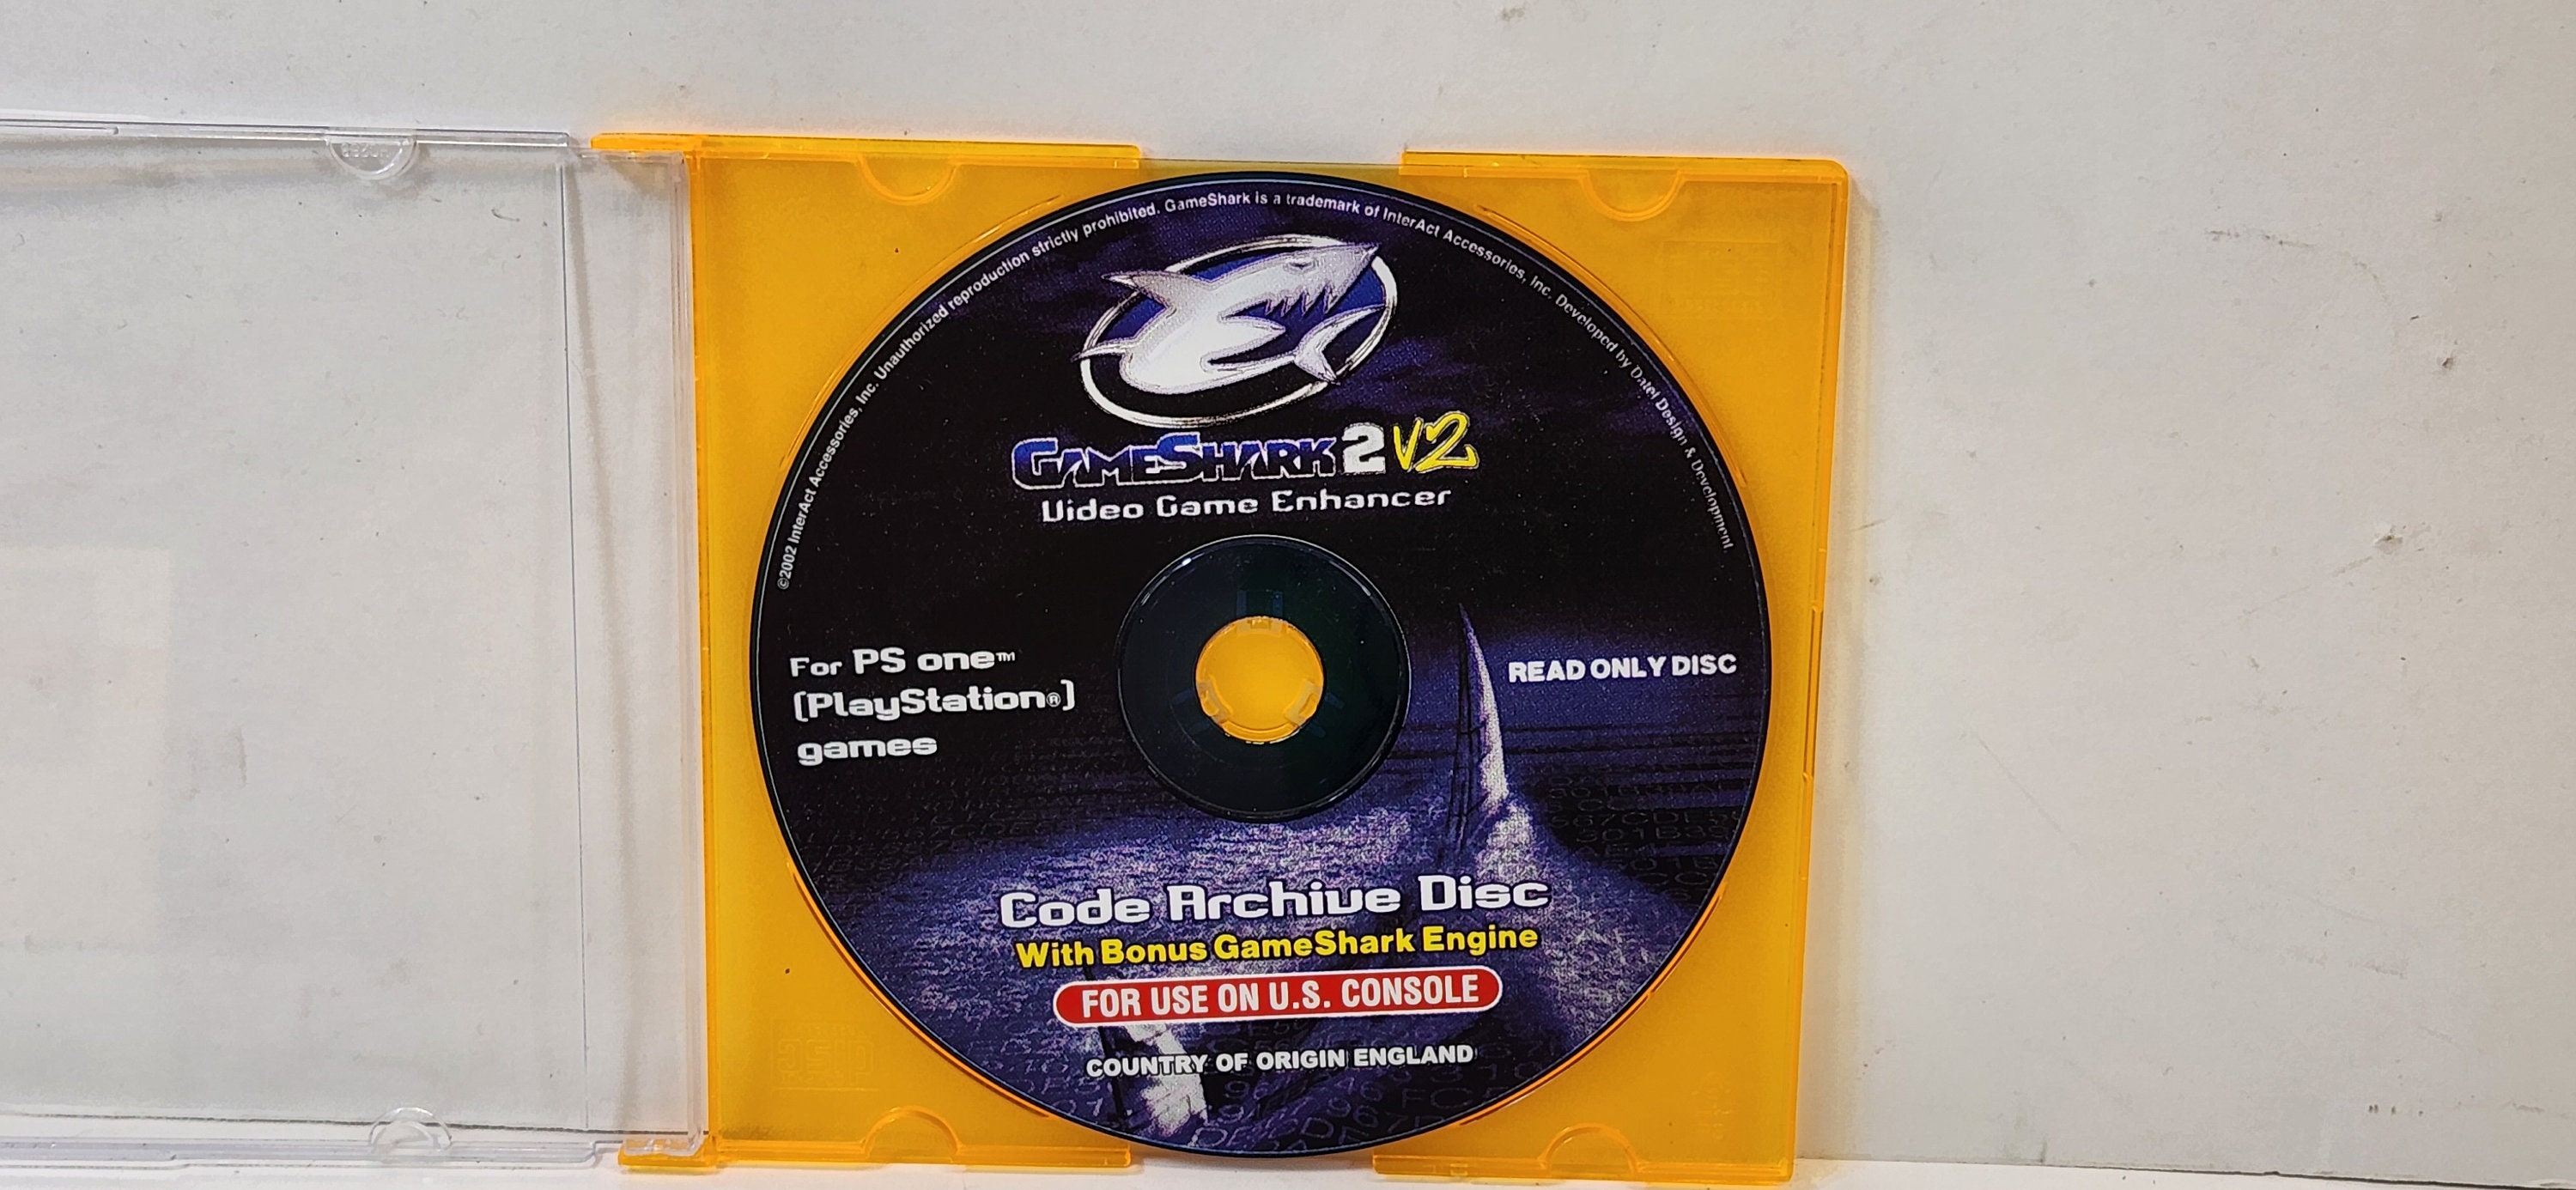 Free: GameShark 2 for PlayStation 2 - Video Game Accessories